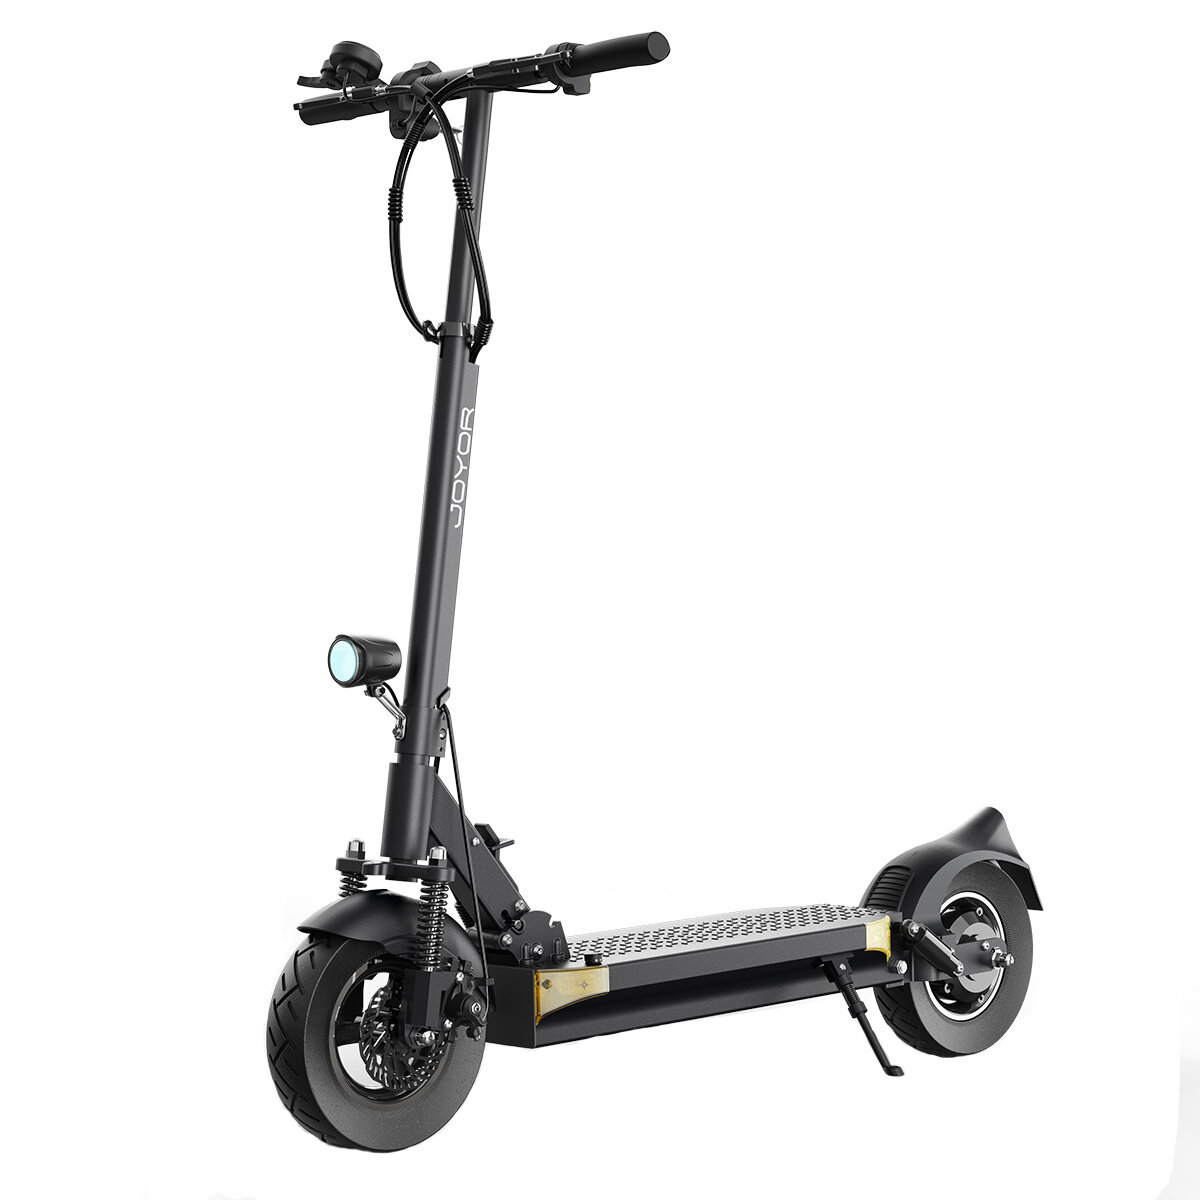 [EU DIRECT] JOYOR Y6-S 500W 48V 18Ah 10in Folding Electric Scooter with Seat 40km/h Top Speed 75KM Max Mileage City E-Scooter